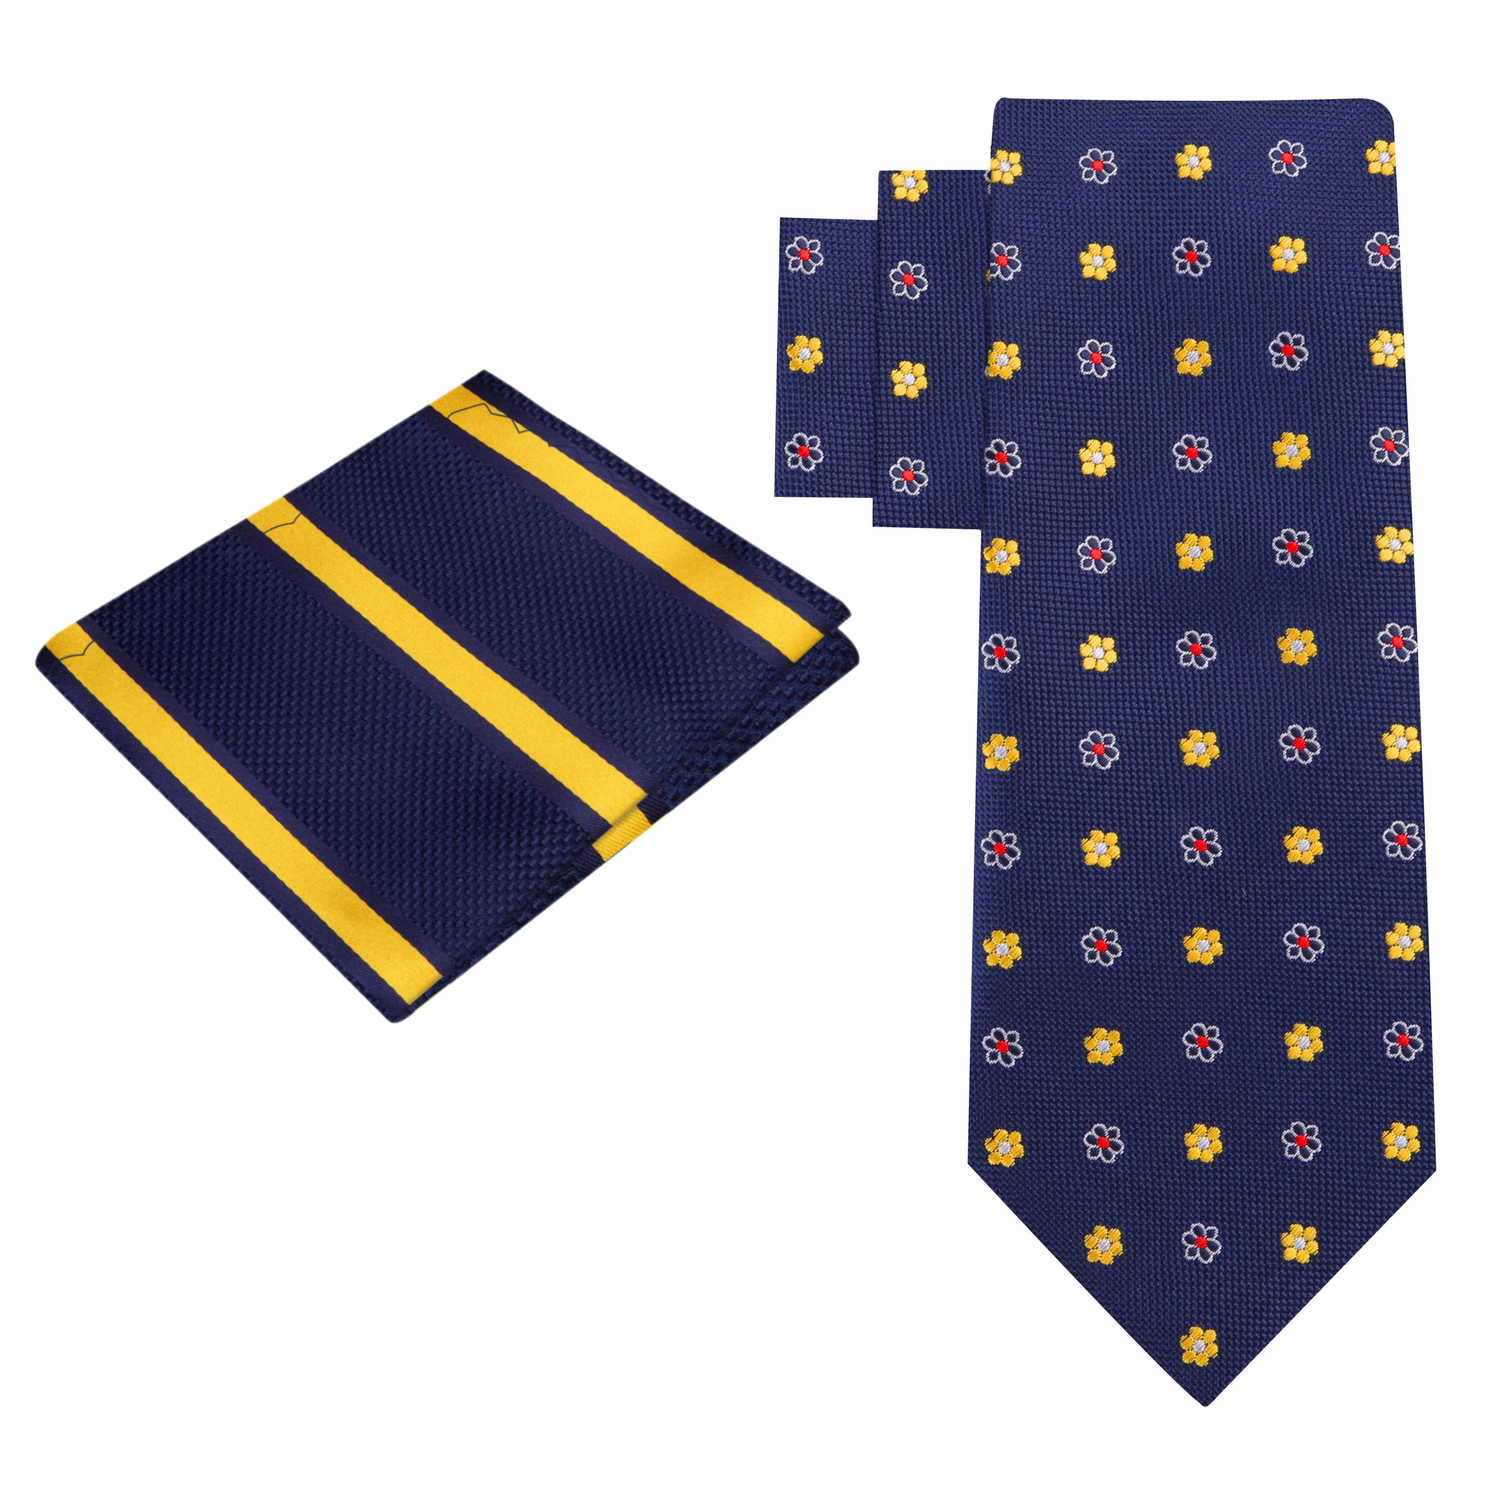 Alt View: Blue, Yellow and Red Small Flowers Tie and Blue and Yellow Stripe Square